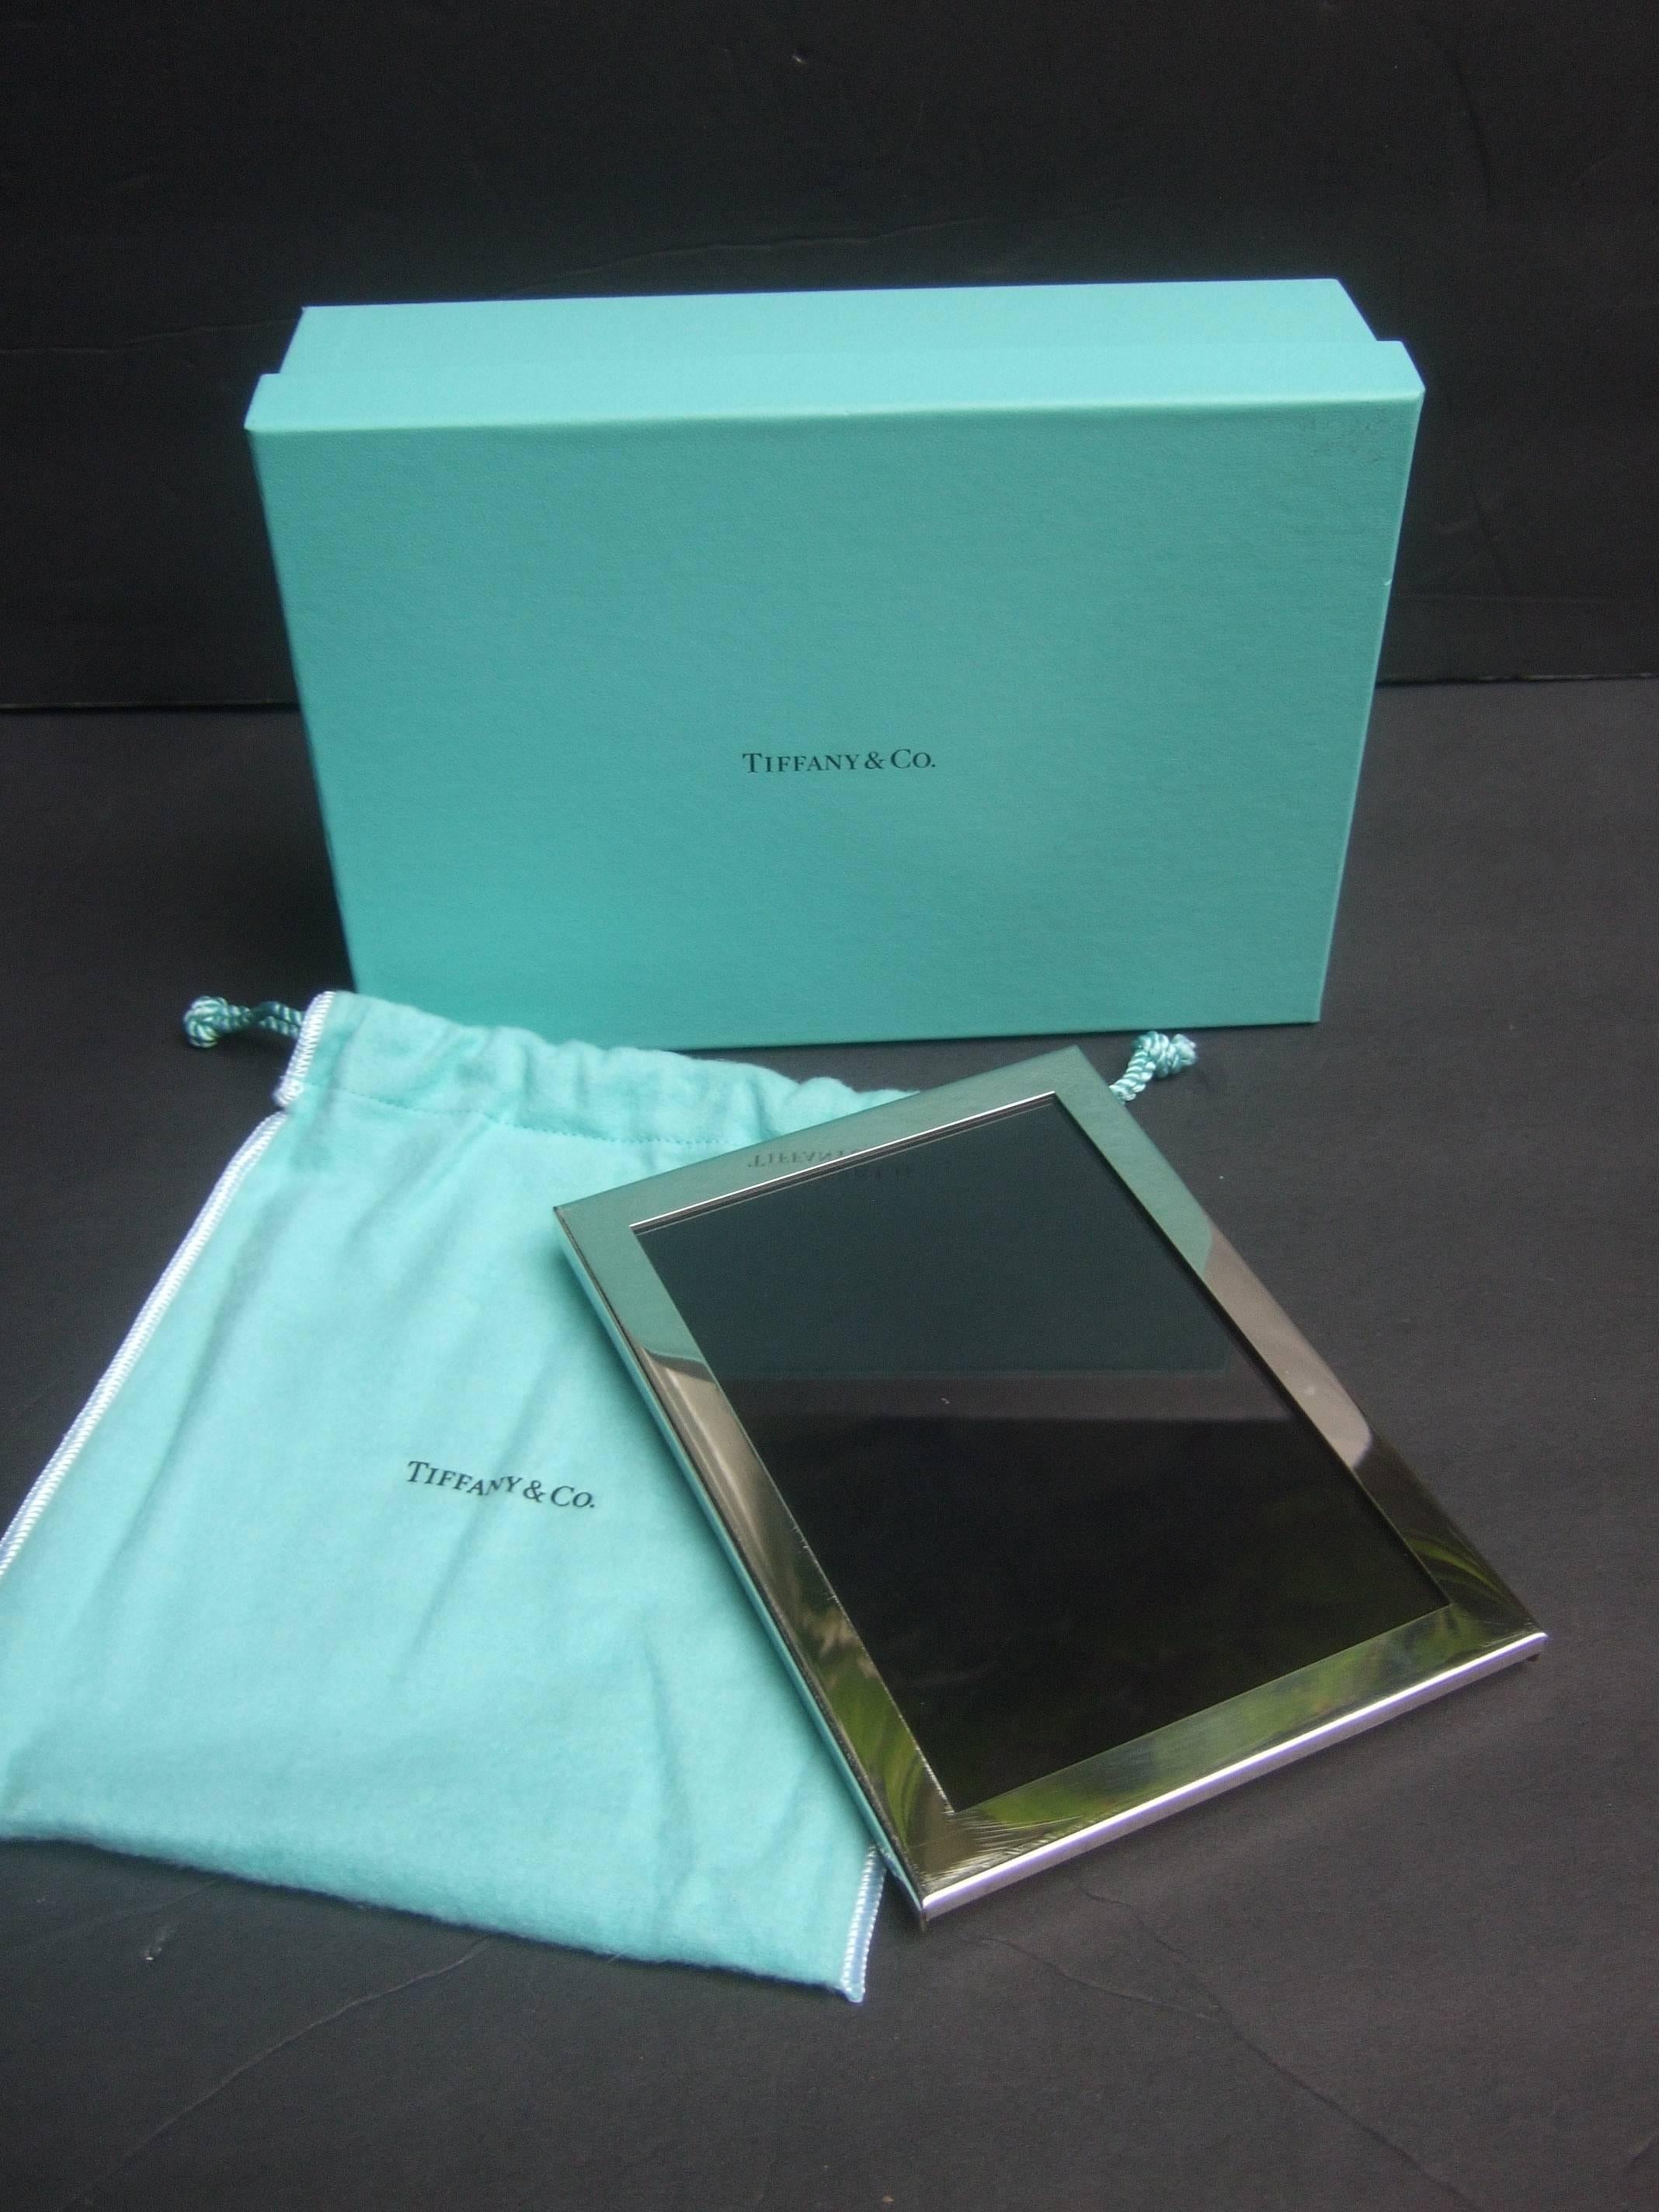 Tiffany and Company sleek chrome photo frame in Tiffany box
The classic picture frame makes an elegant 
timeless accessory

New in the original Tiffany box paired with 
matching Tiffany cloth dust cover pouch  

One of the metal edges is stamped